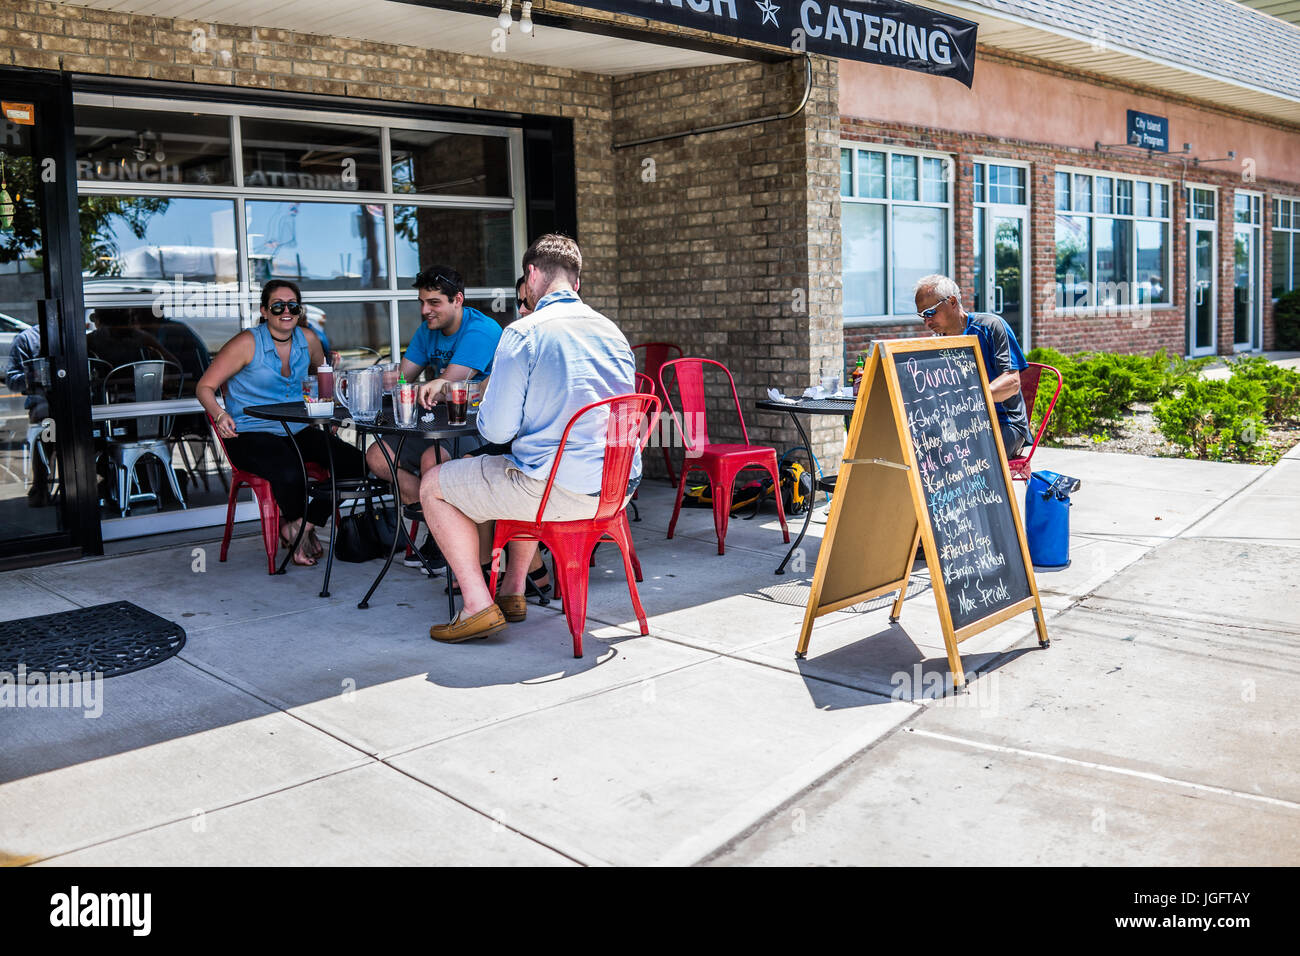 Bronx, USA - June 11, 2017: People eating brunch outside at outdoor seating area with tables in City Island at Archie's restaurant with sidewalk Stock Photo